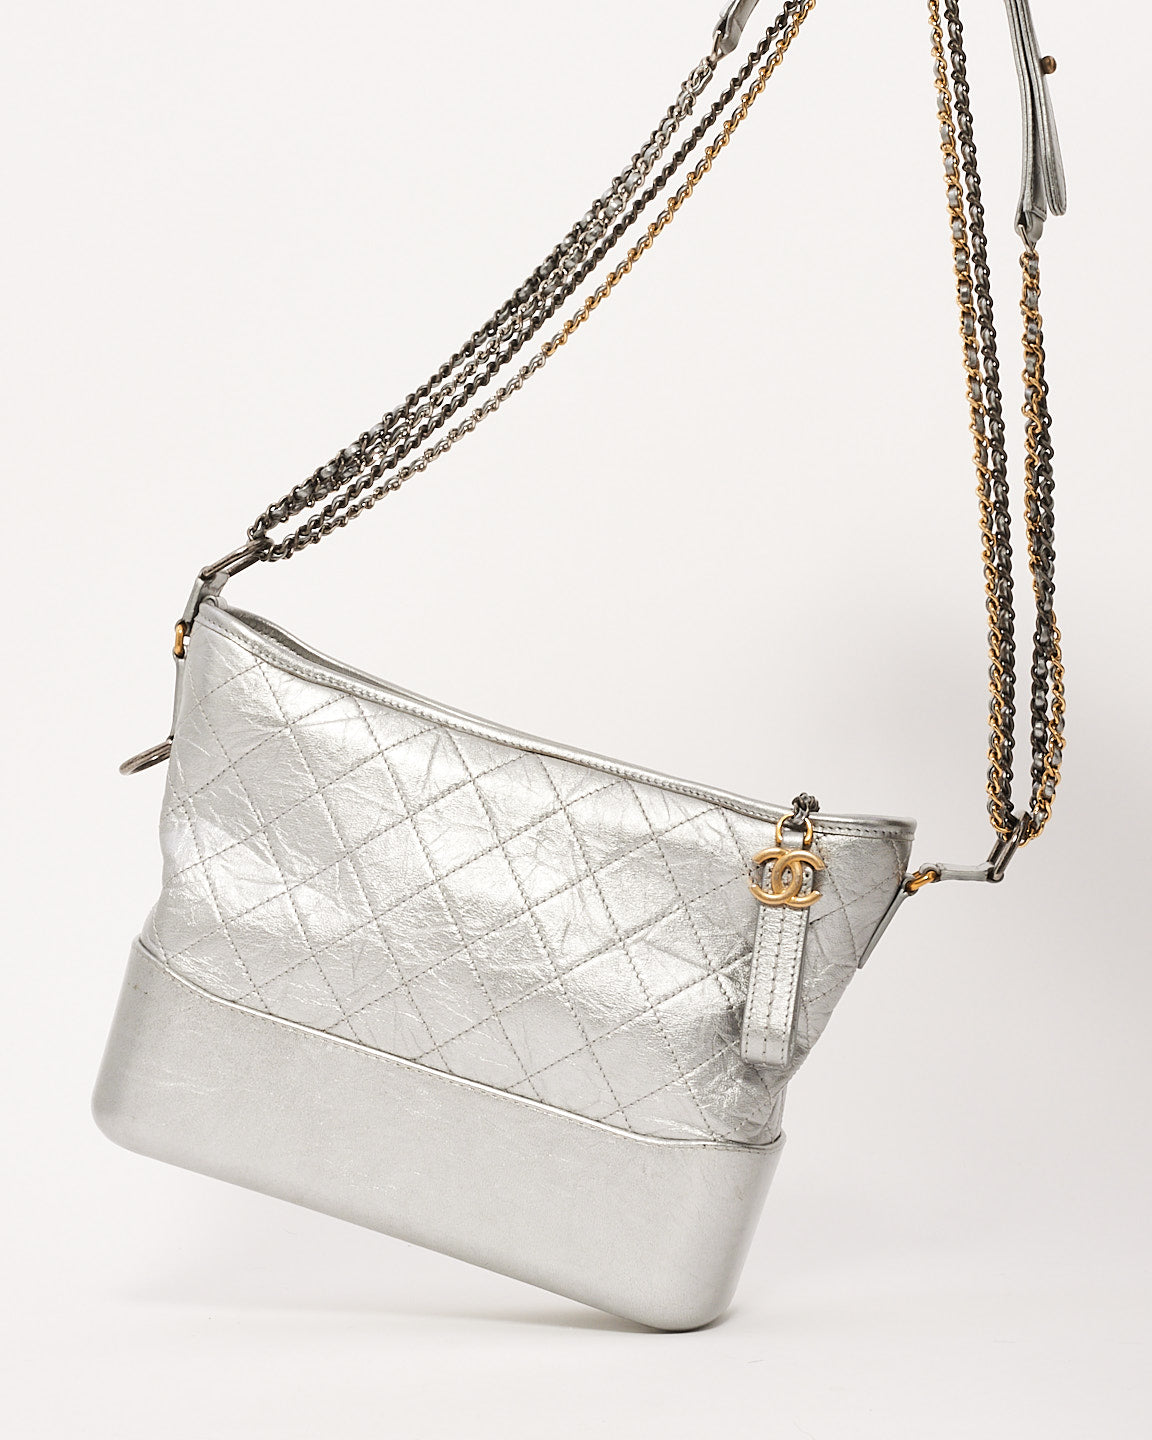 Chanel Silver Metallic Quilted Gabrielle Large Bag